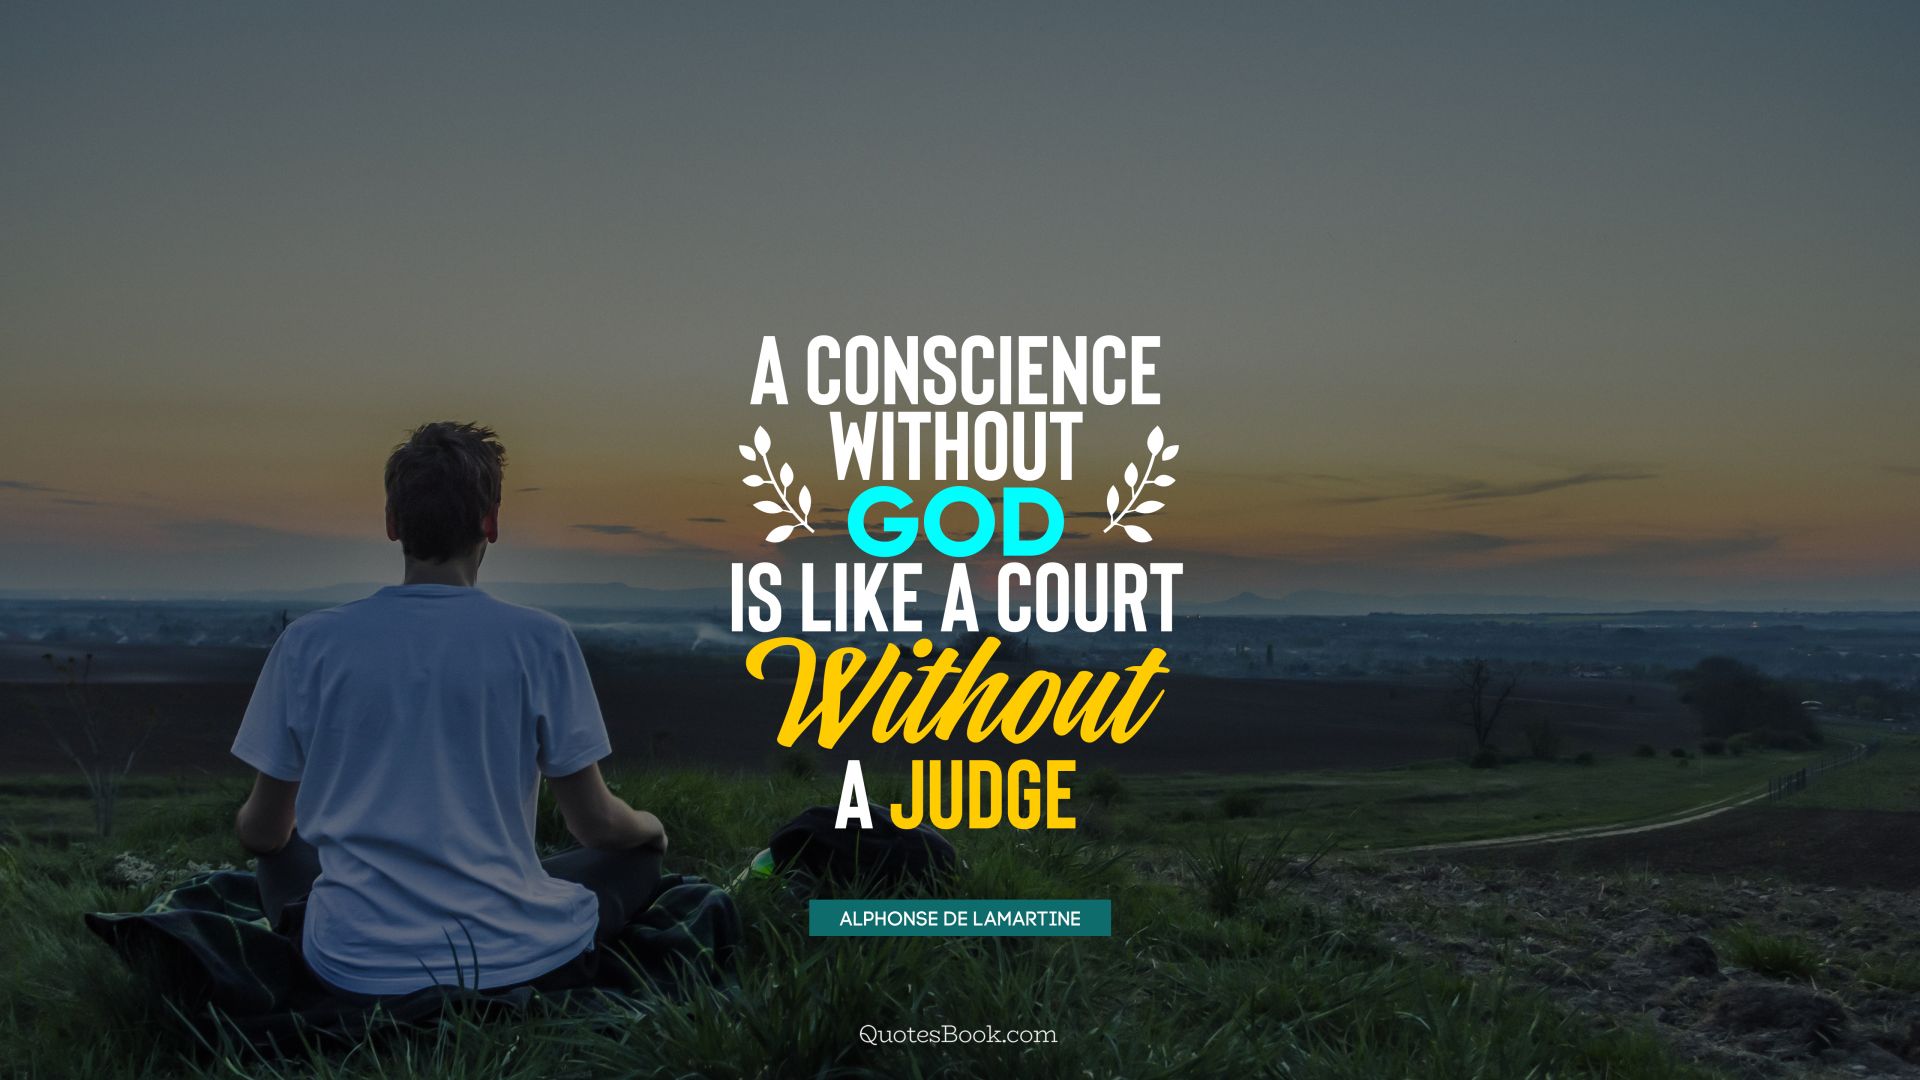 A conscience without God is like a court without a judge. - Quote by Alphonse de Lamartine